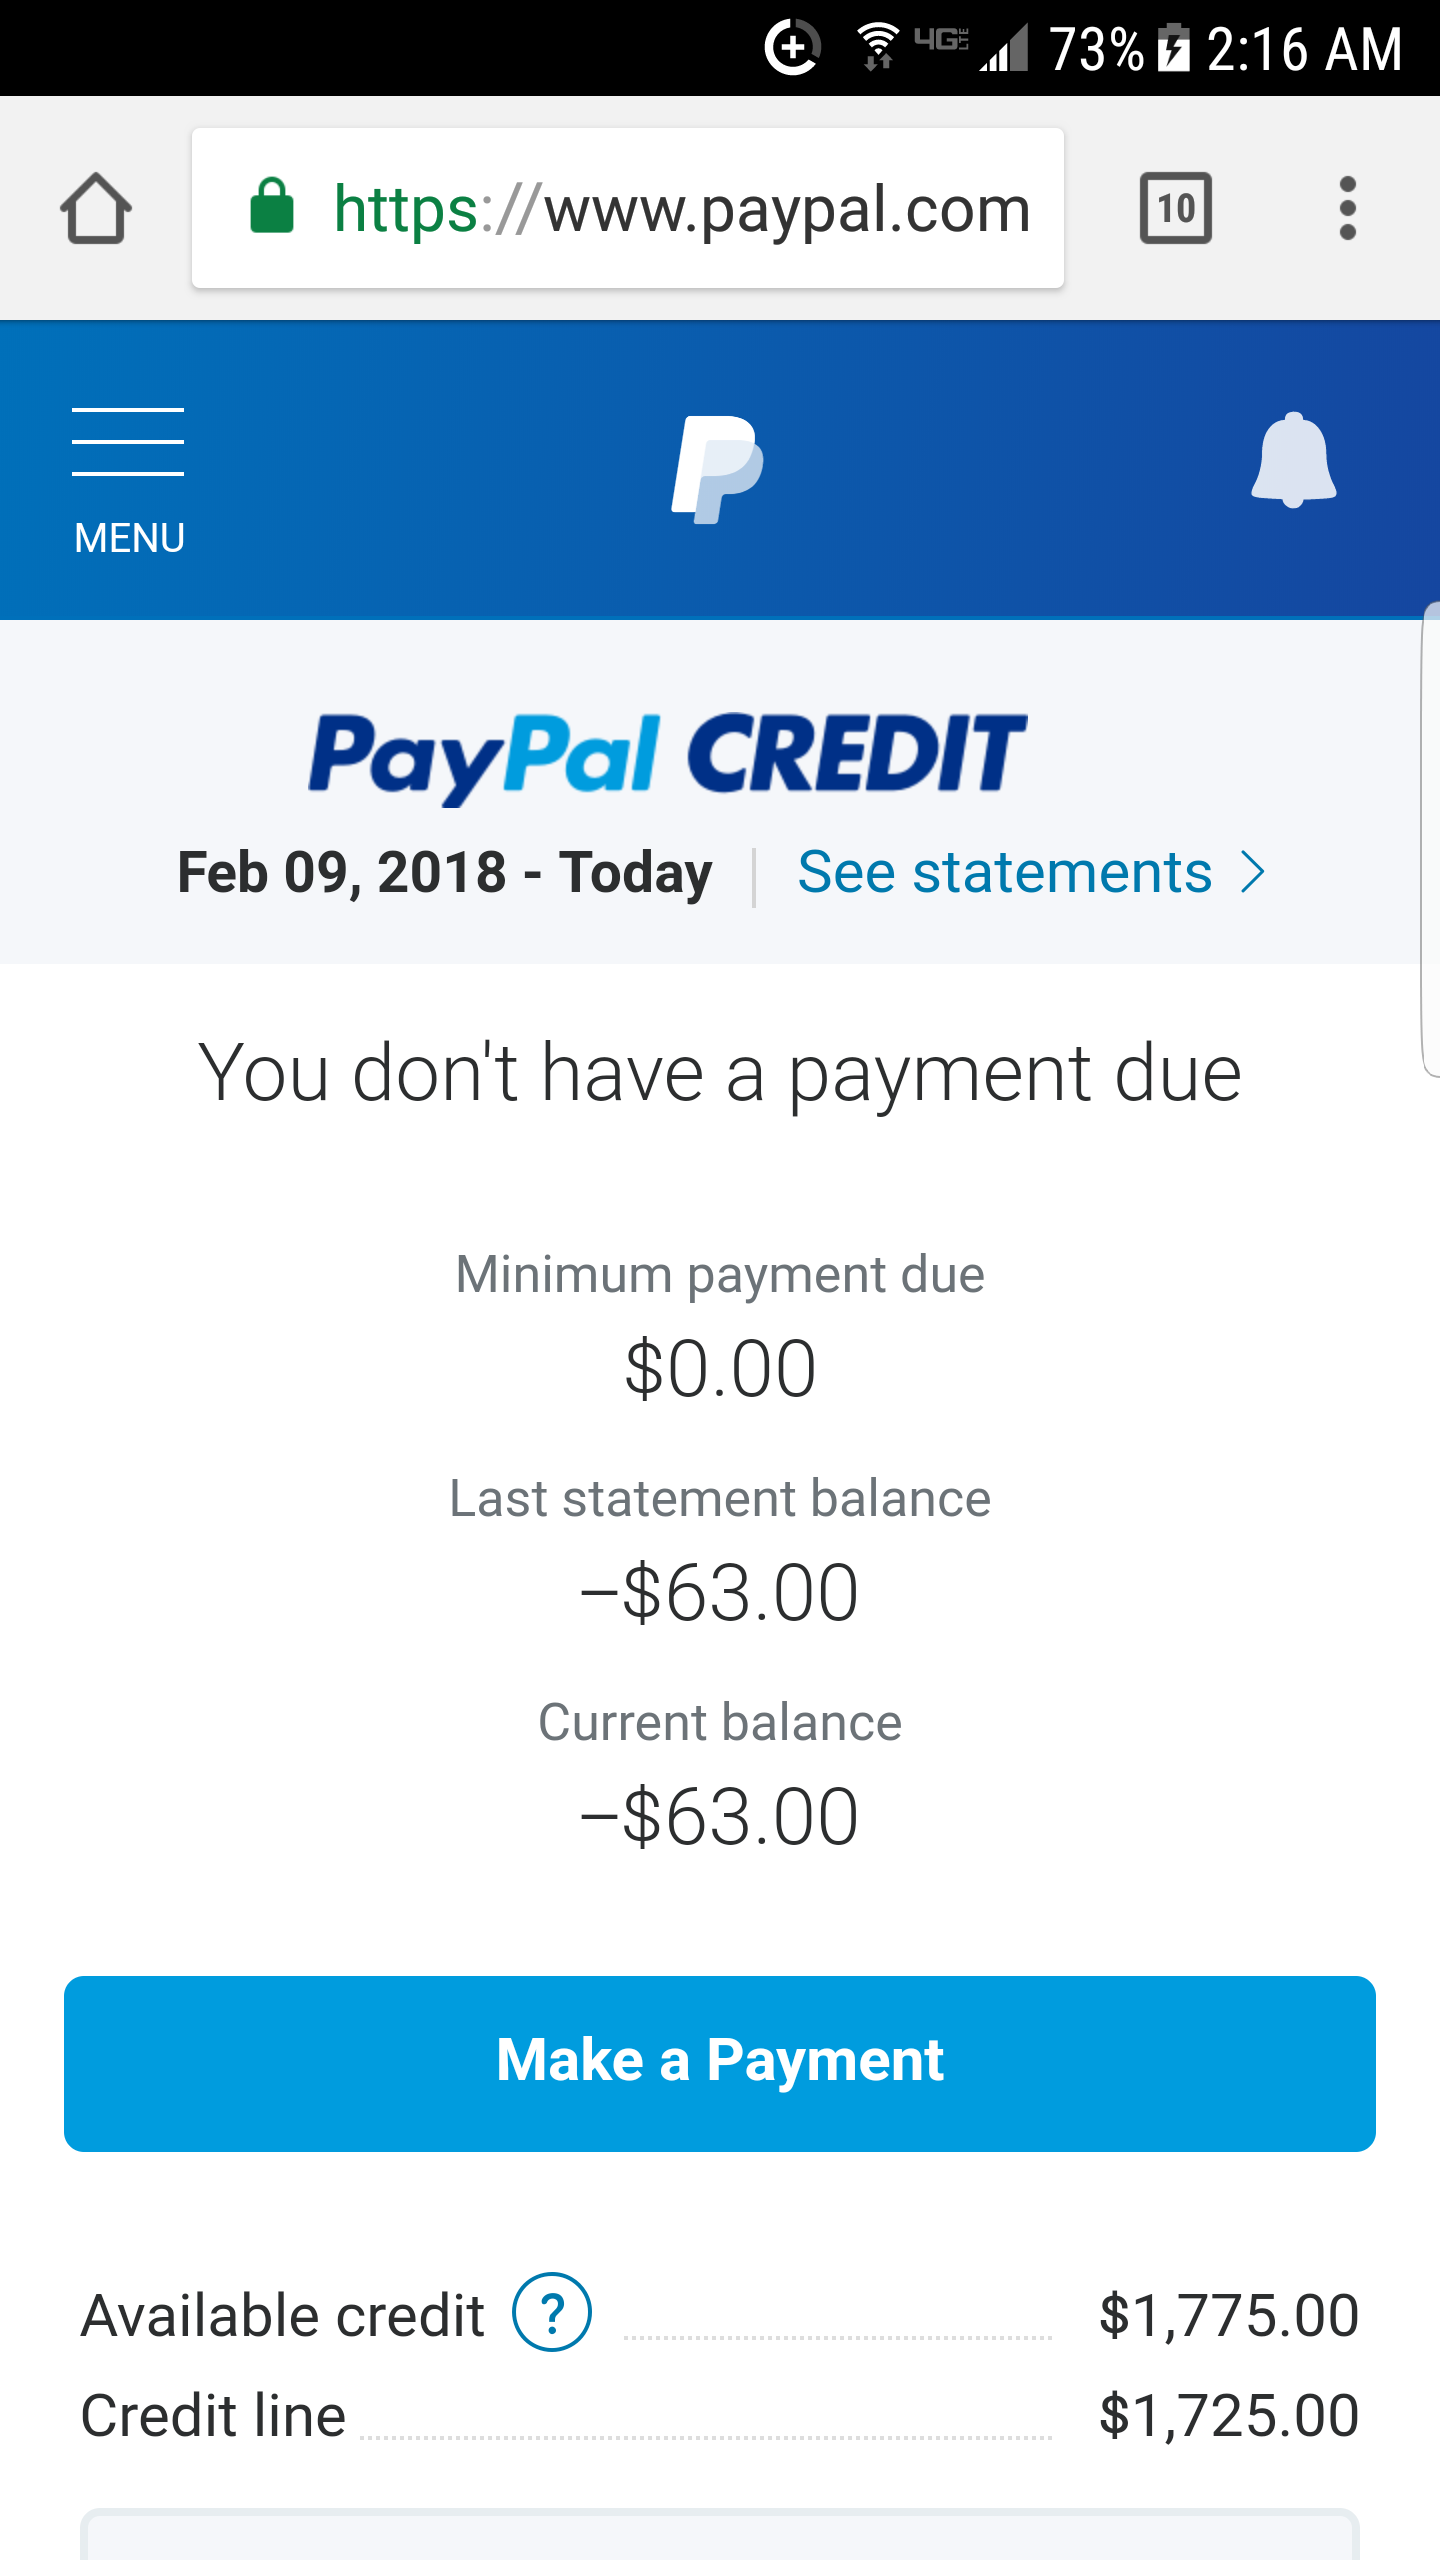 What does it mean when I have a "Negative $63.00 balance ...